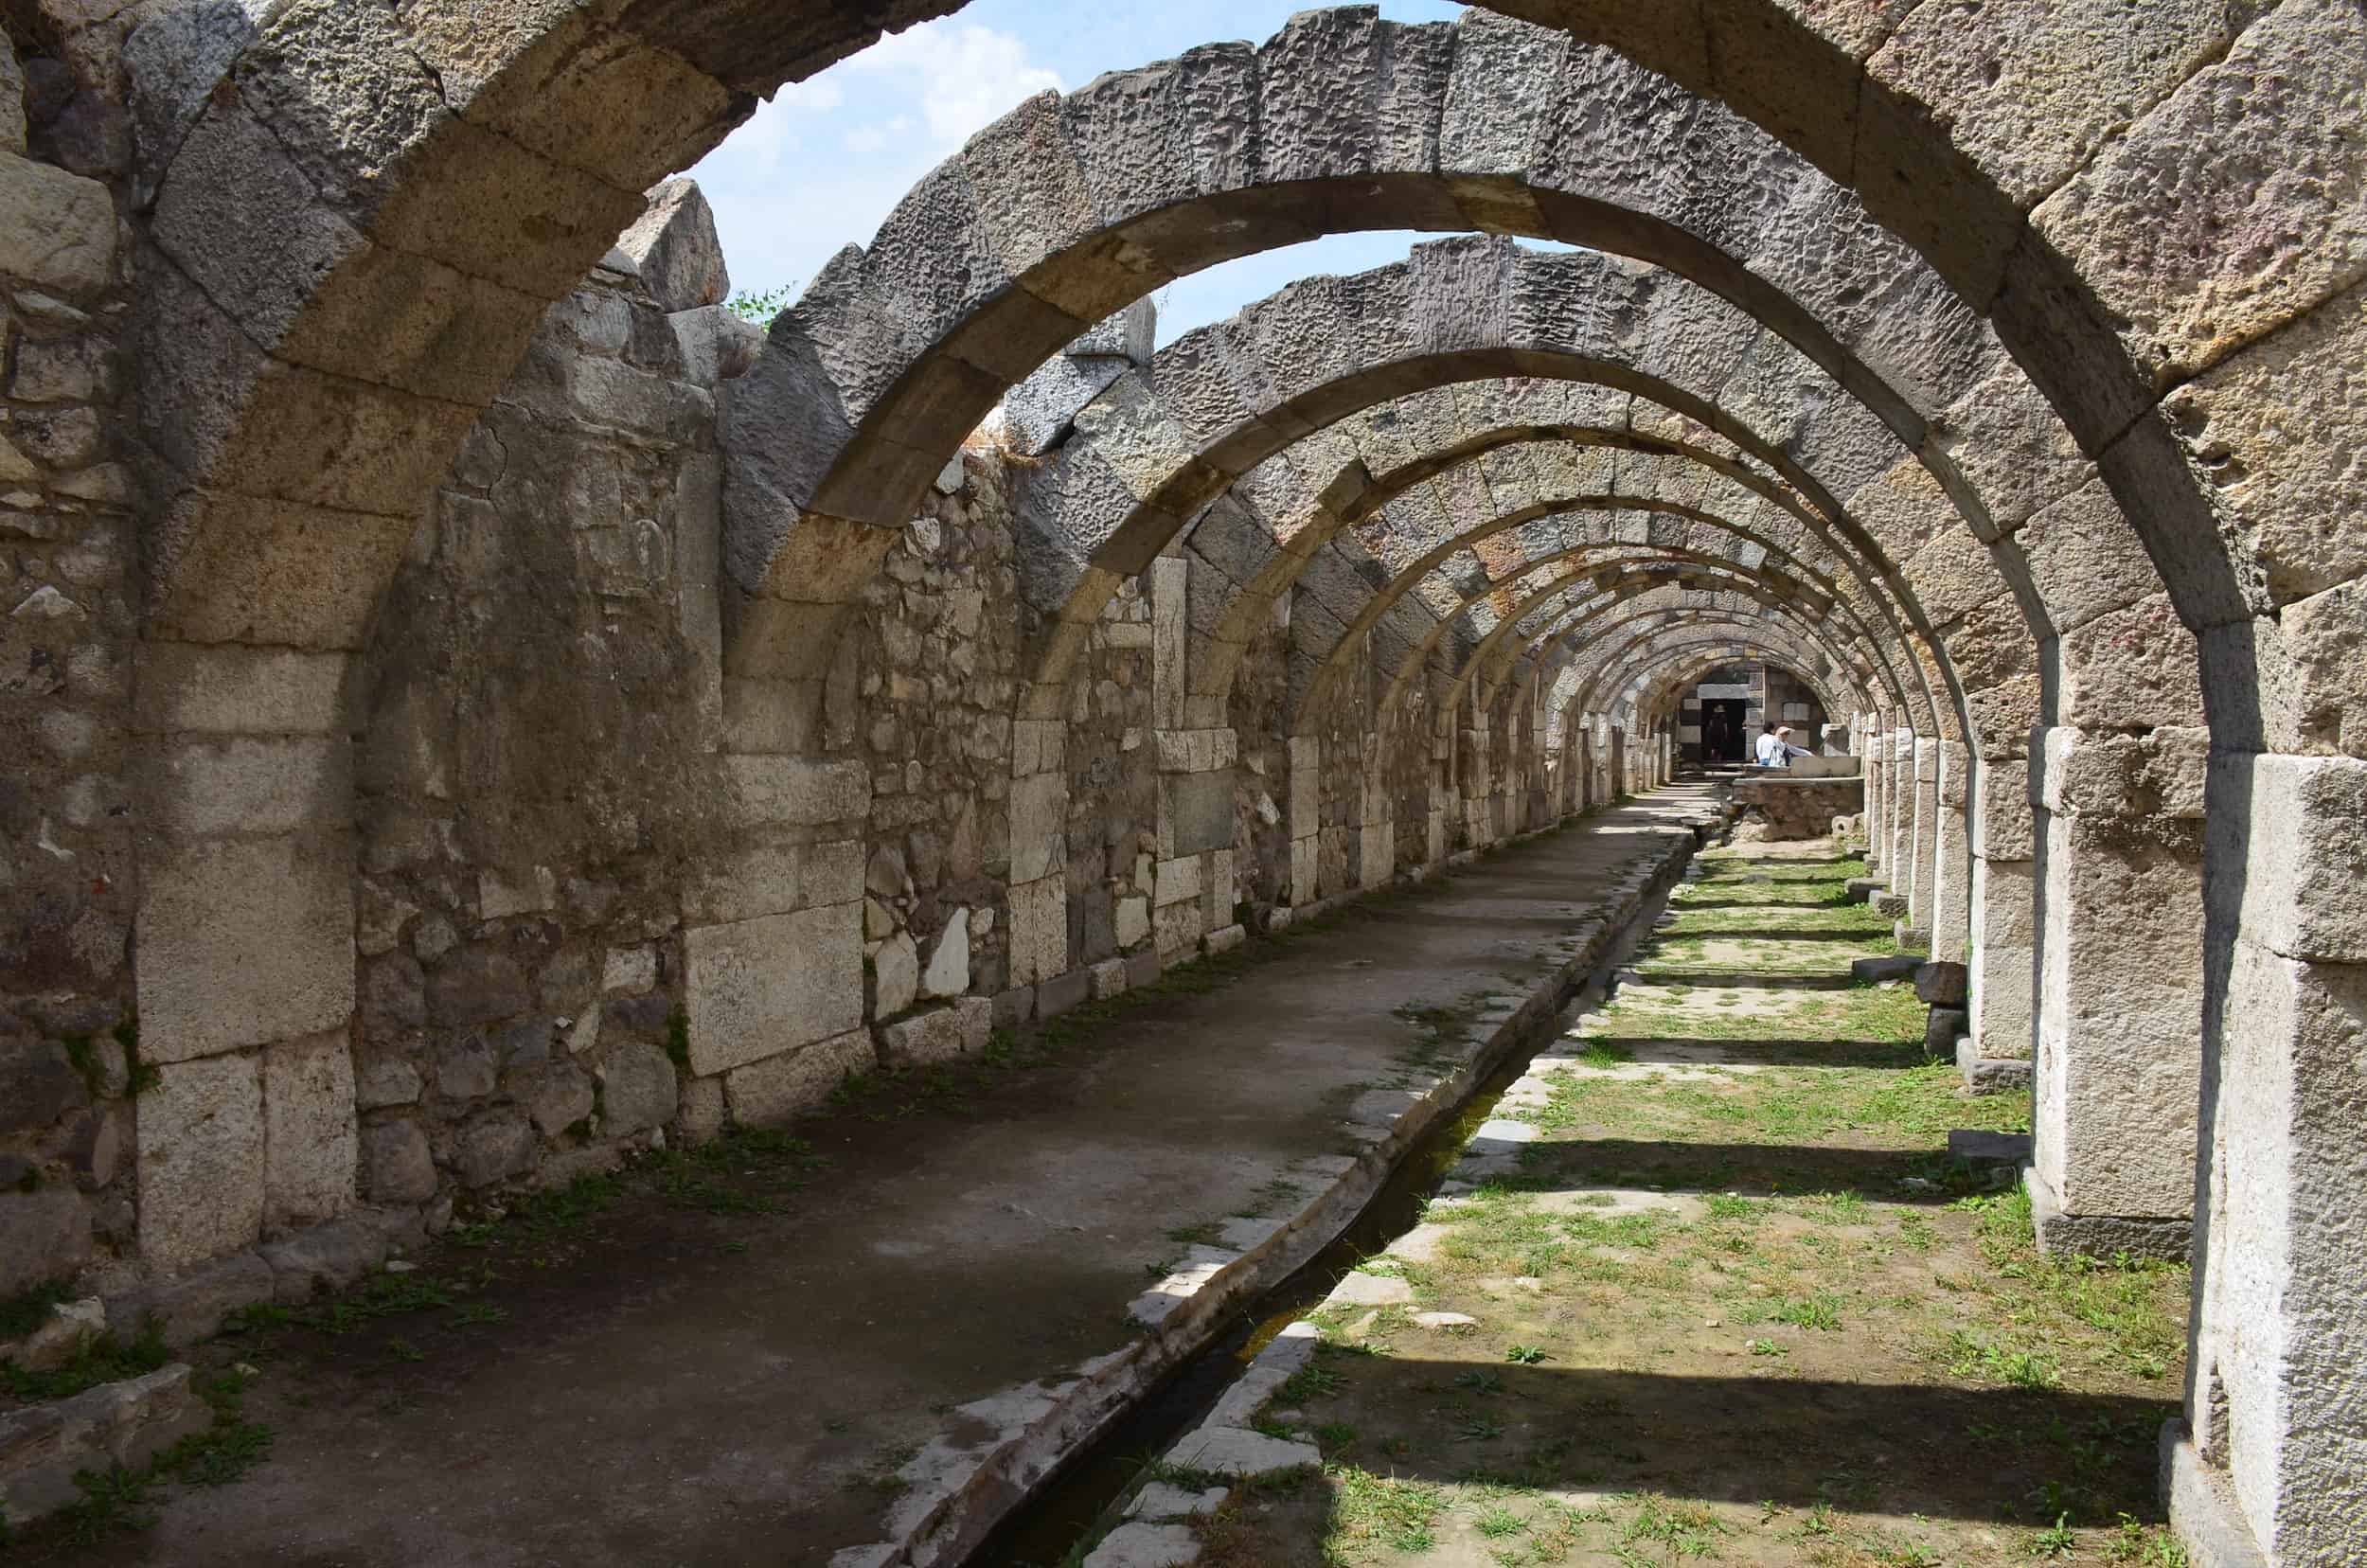 First gallery of the basement of the west portico of the Smyrna Agora in Izmir, Turkey